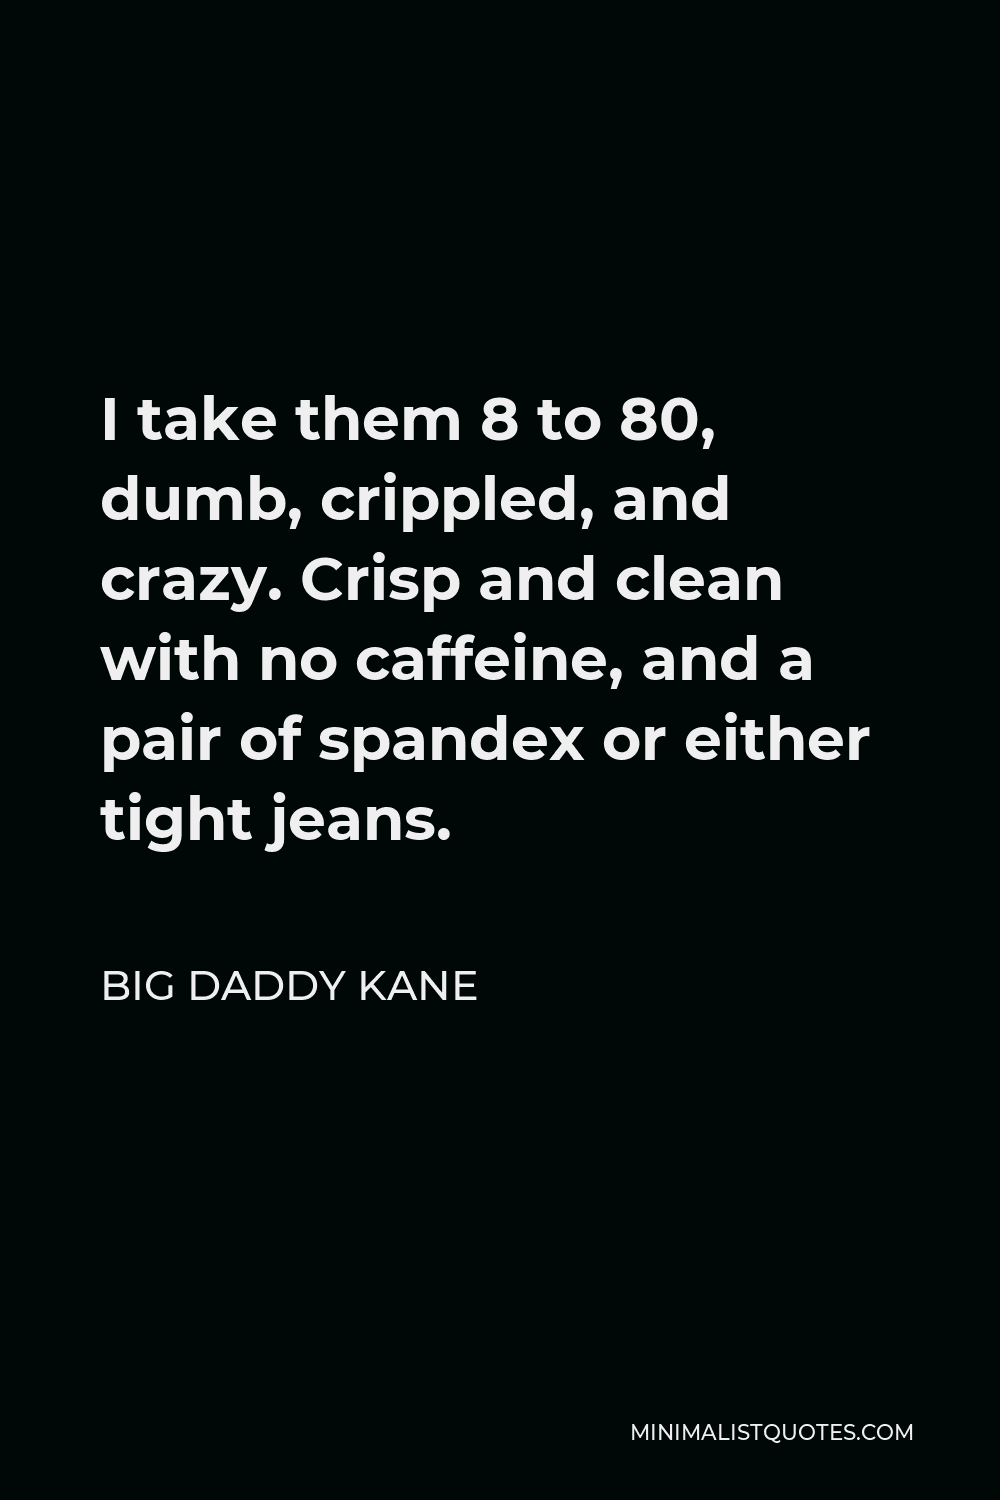 Big Daddy Kane Quote - I take them 8 to 80, dumb, crippled, and crazy. Crisp and clean with no caffeine, and a pair of spandex or either tight jeans.